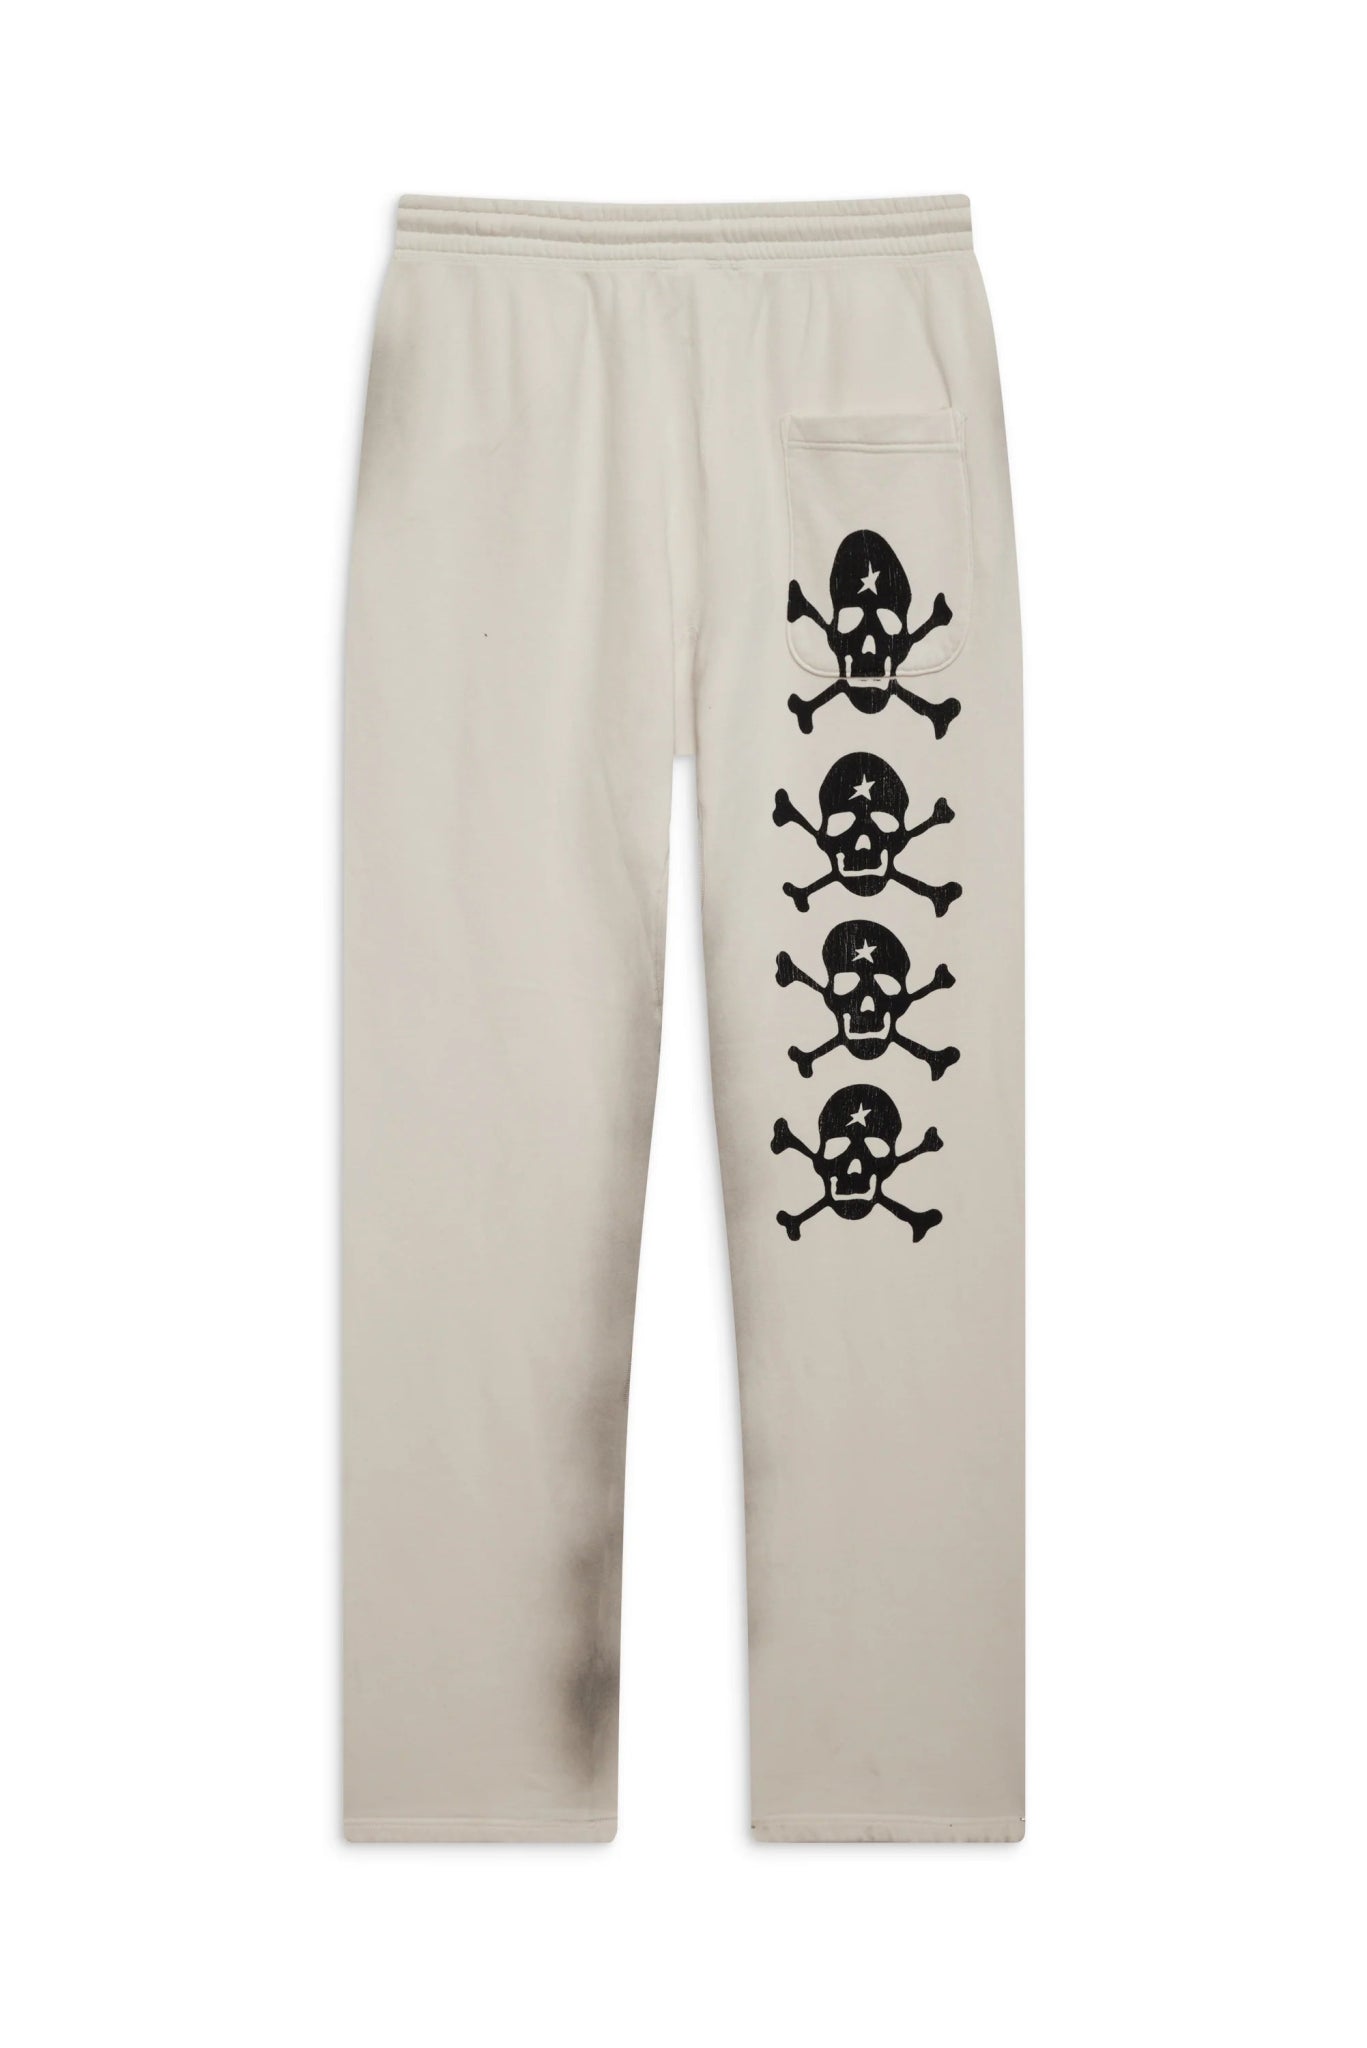 Hellstar Sports If You Dont Like Us Beat Us Sweatpants - Supra Sneakers